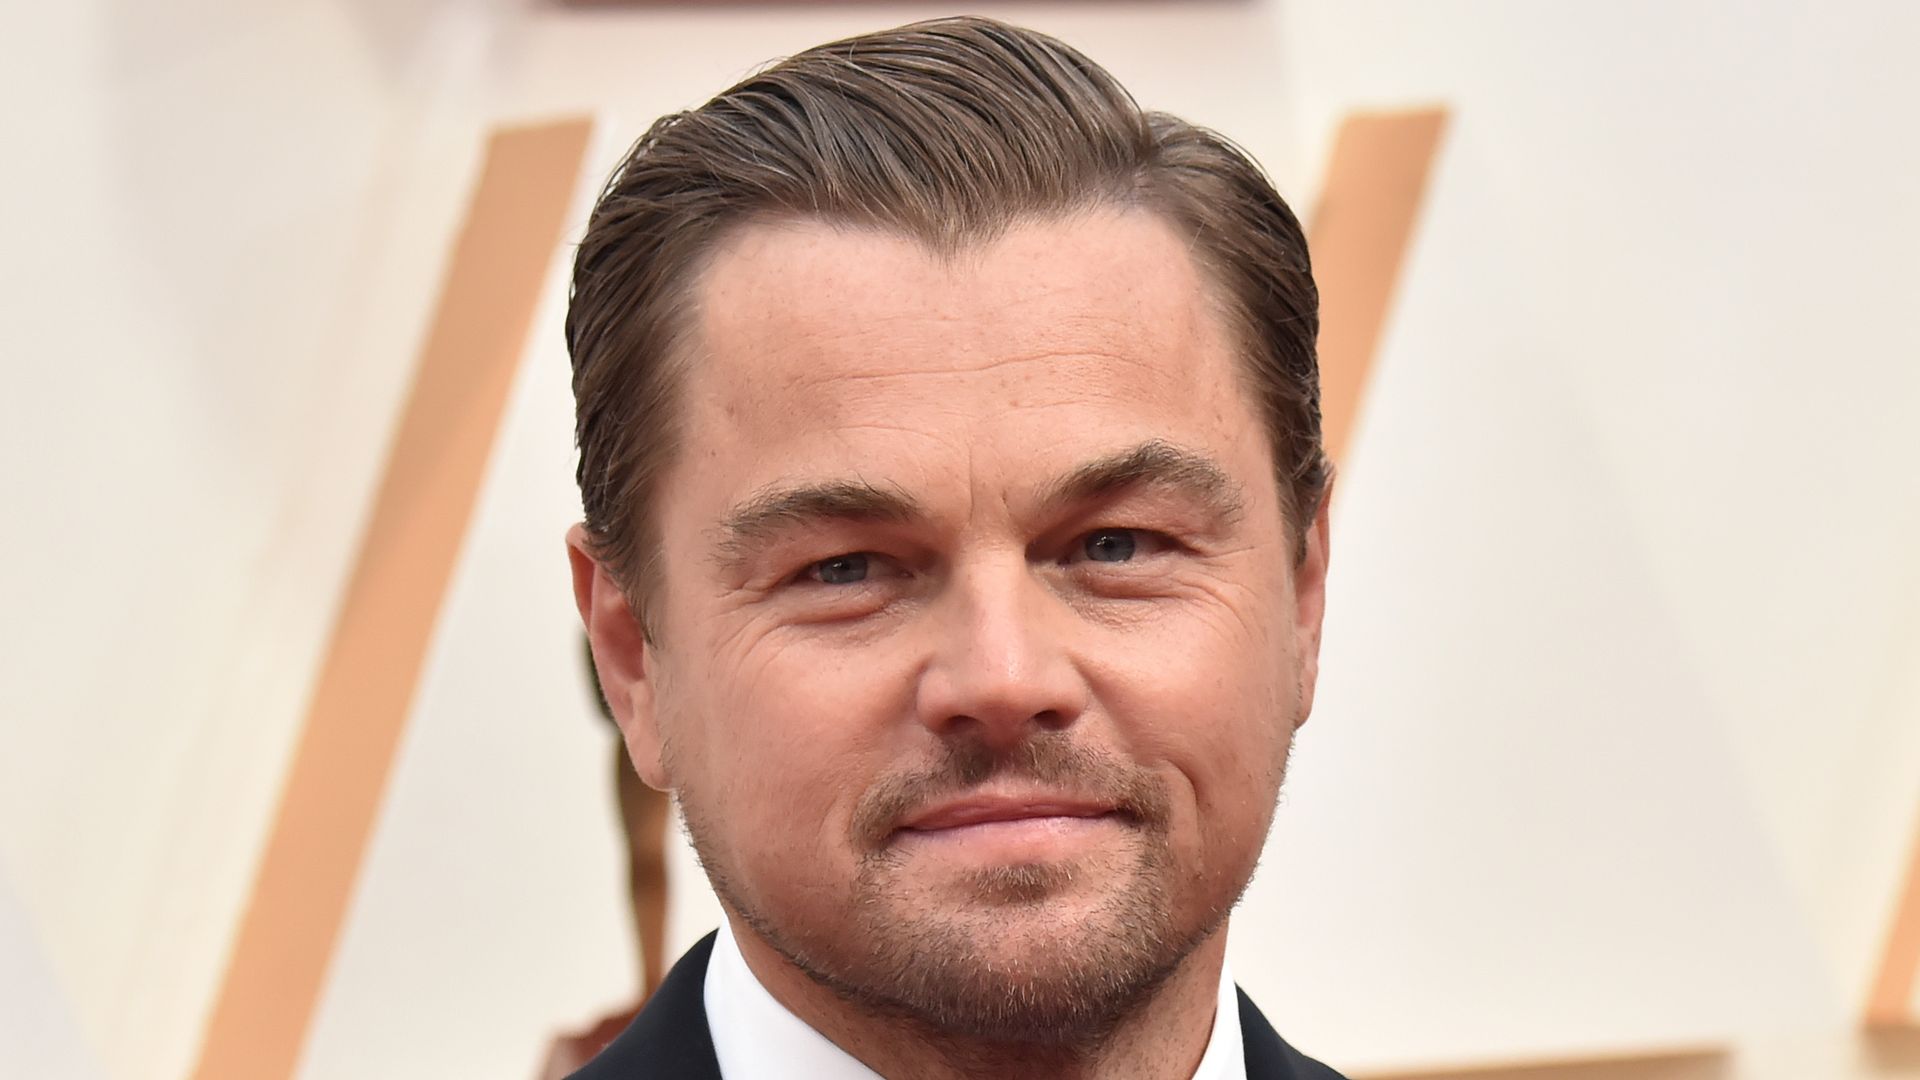 Leonardo DiCaprio on the red carpet in a smart suit